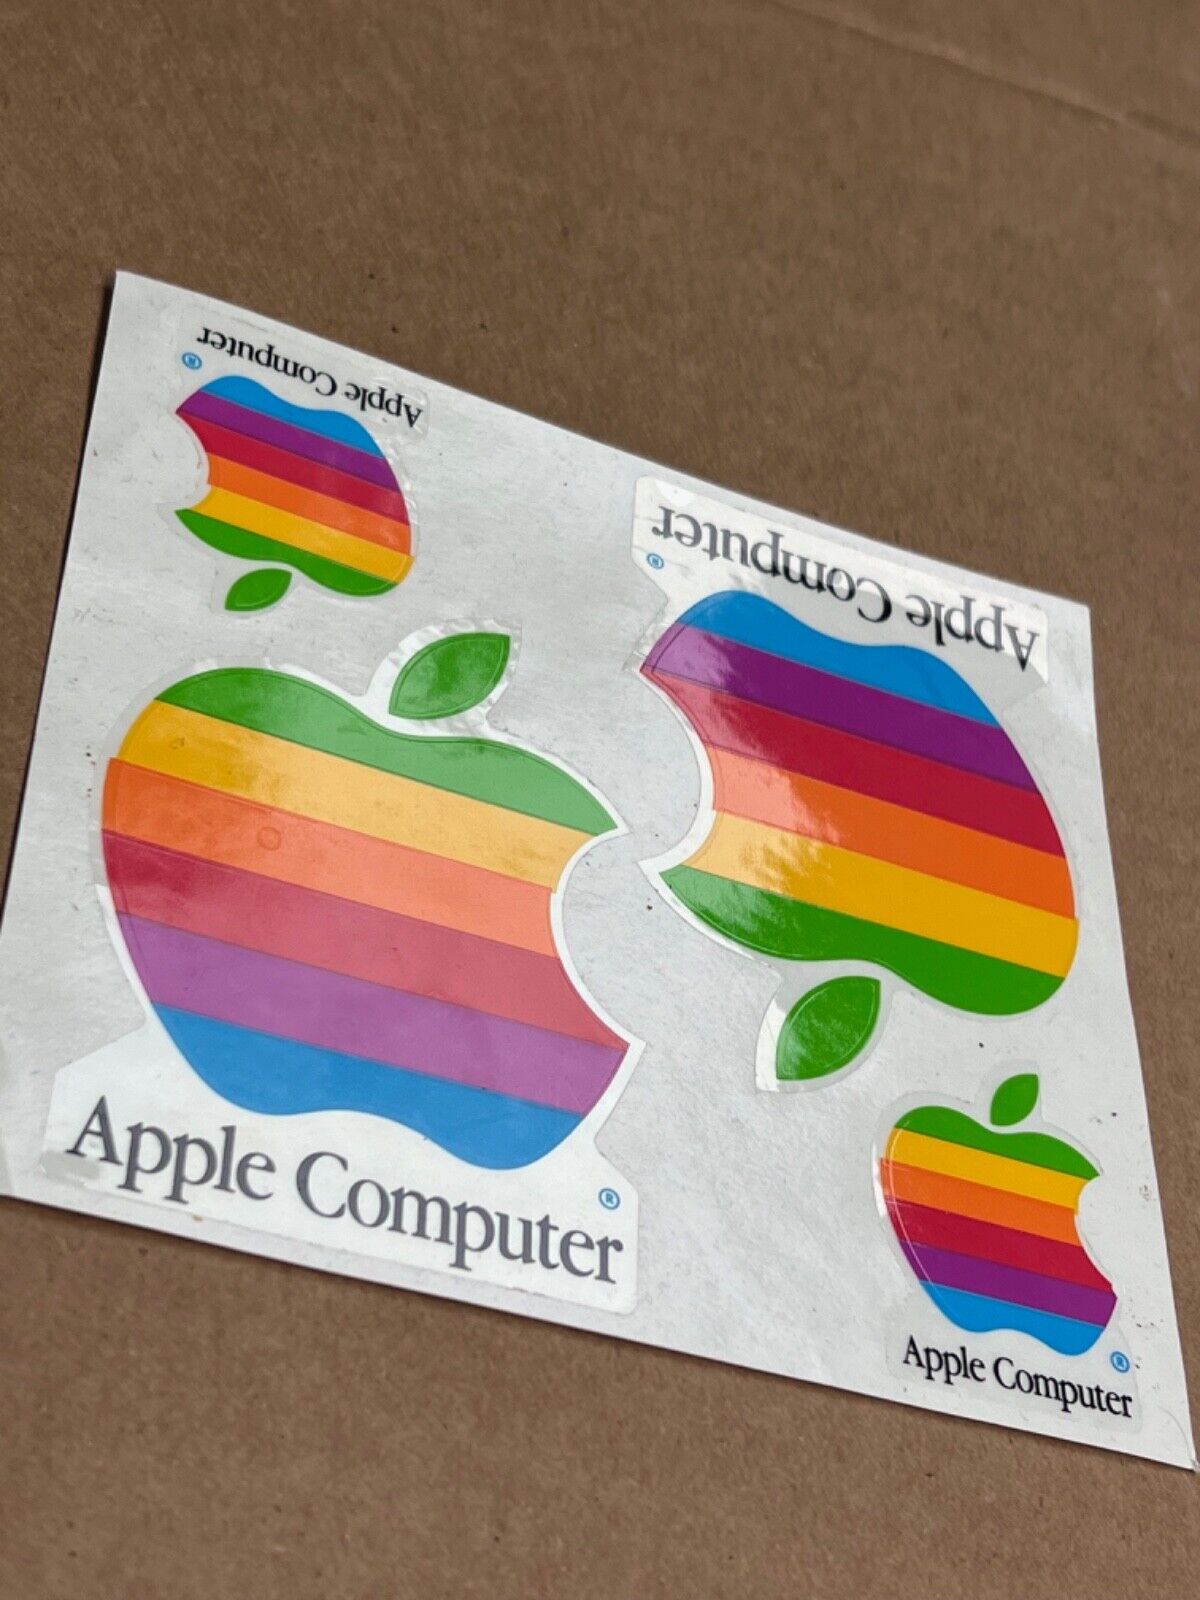 Vintage Apple Computer Stickers 1990 Rainbow Apple Decals NOS Sheet Never Peeled